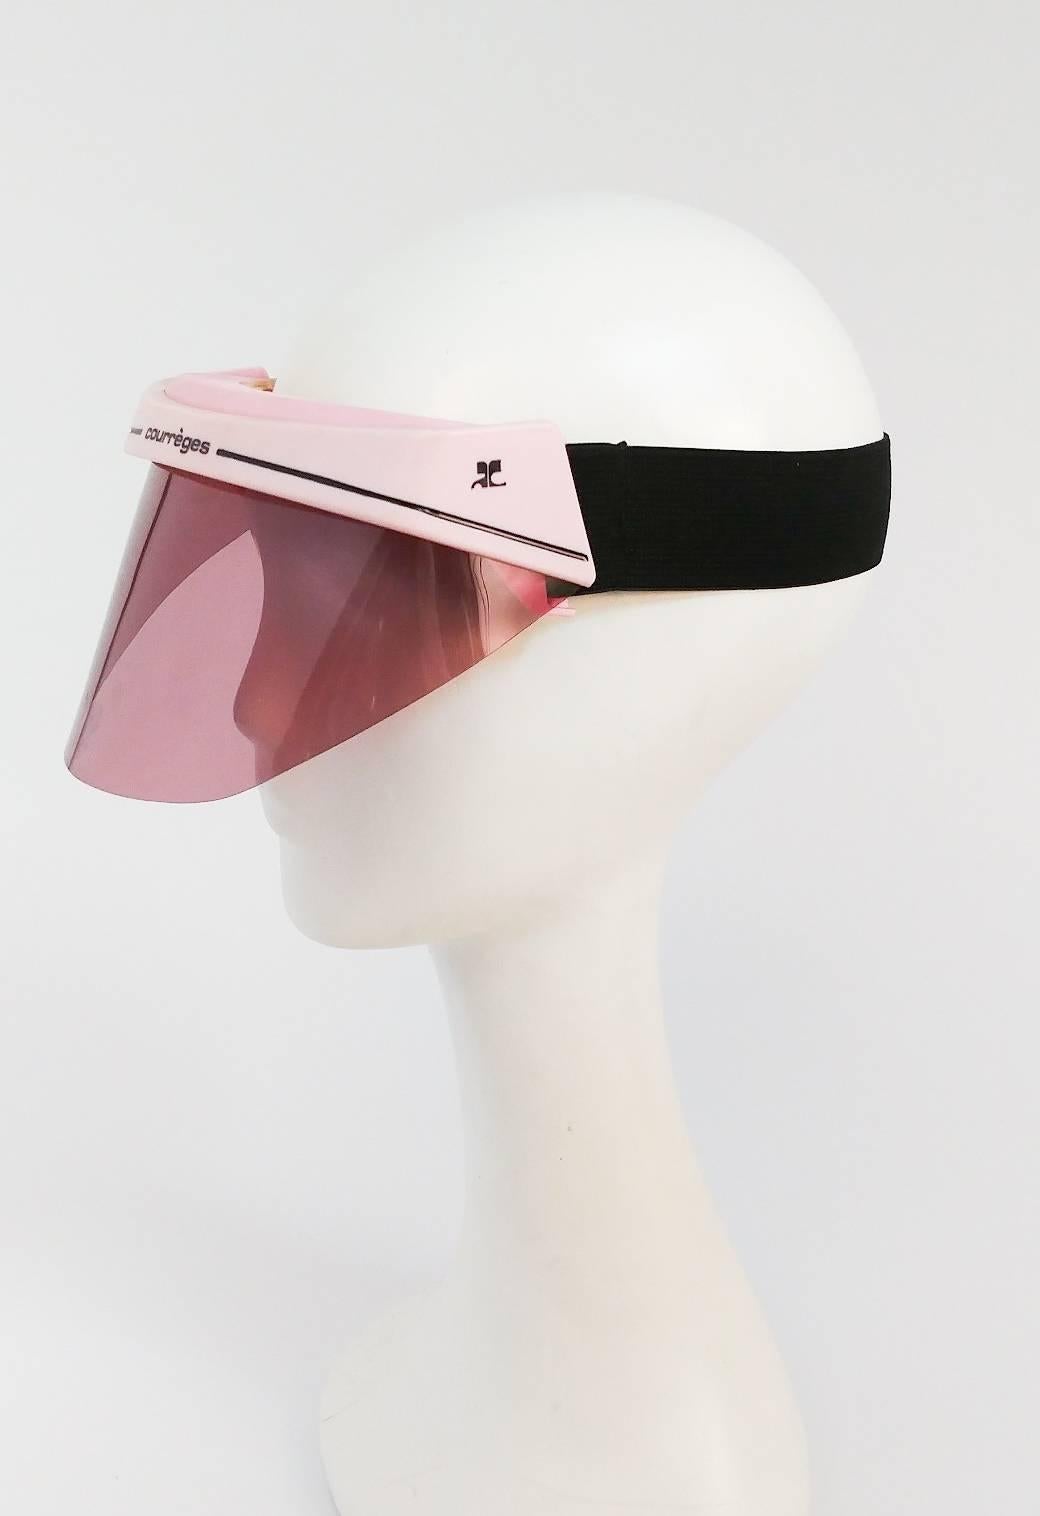 1970s Courreges Pink Sport Future Visor. Wide pink visor covers most of face. Light pink frame with 